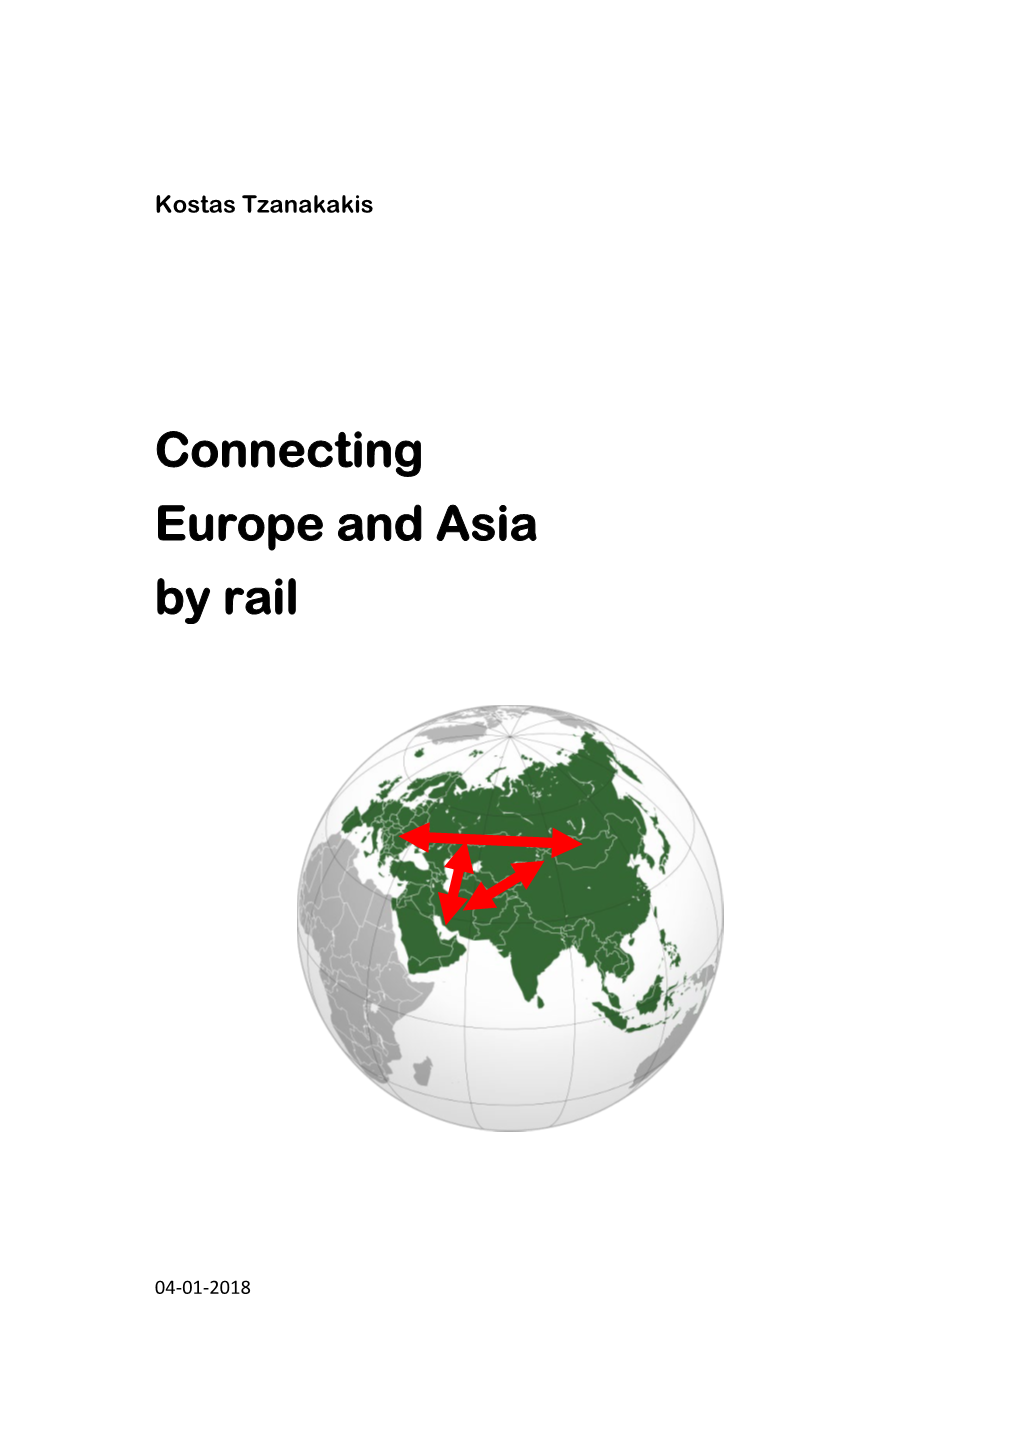 Connecting Europe and Asia by Rail